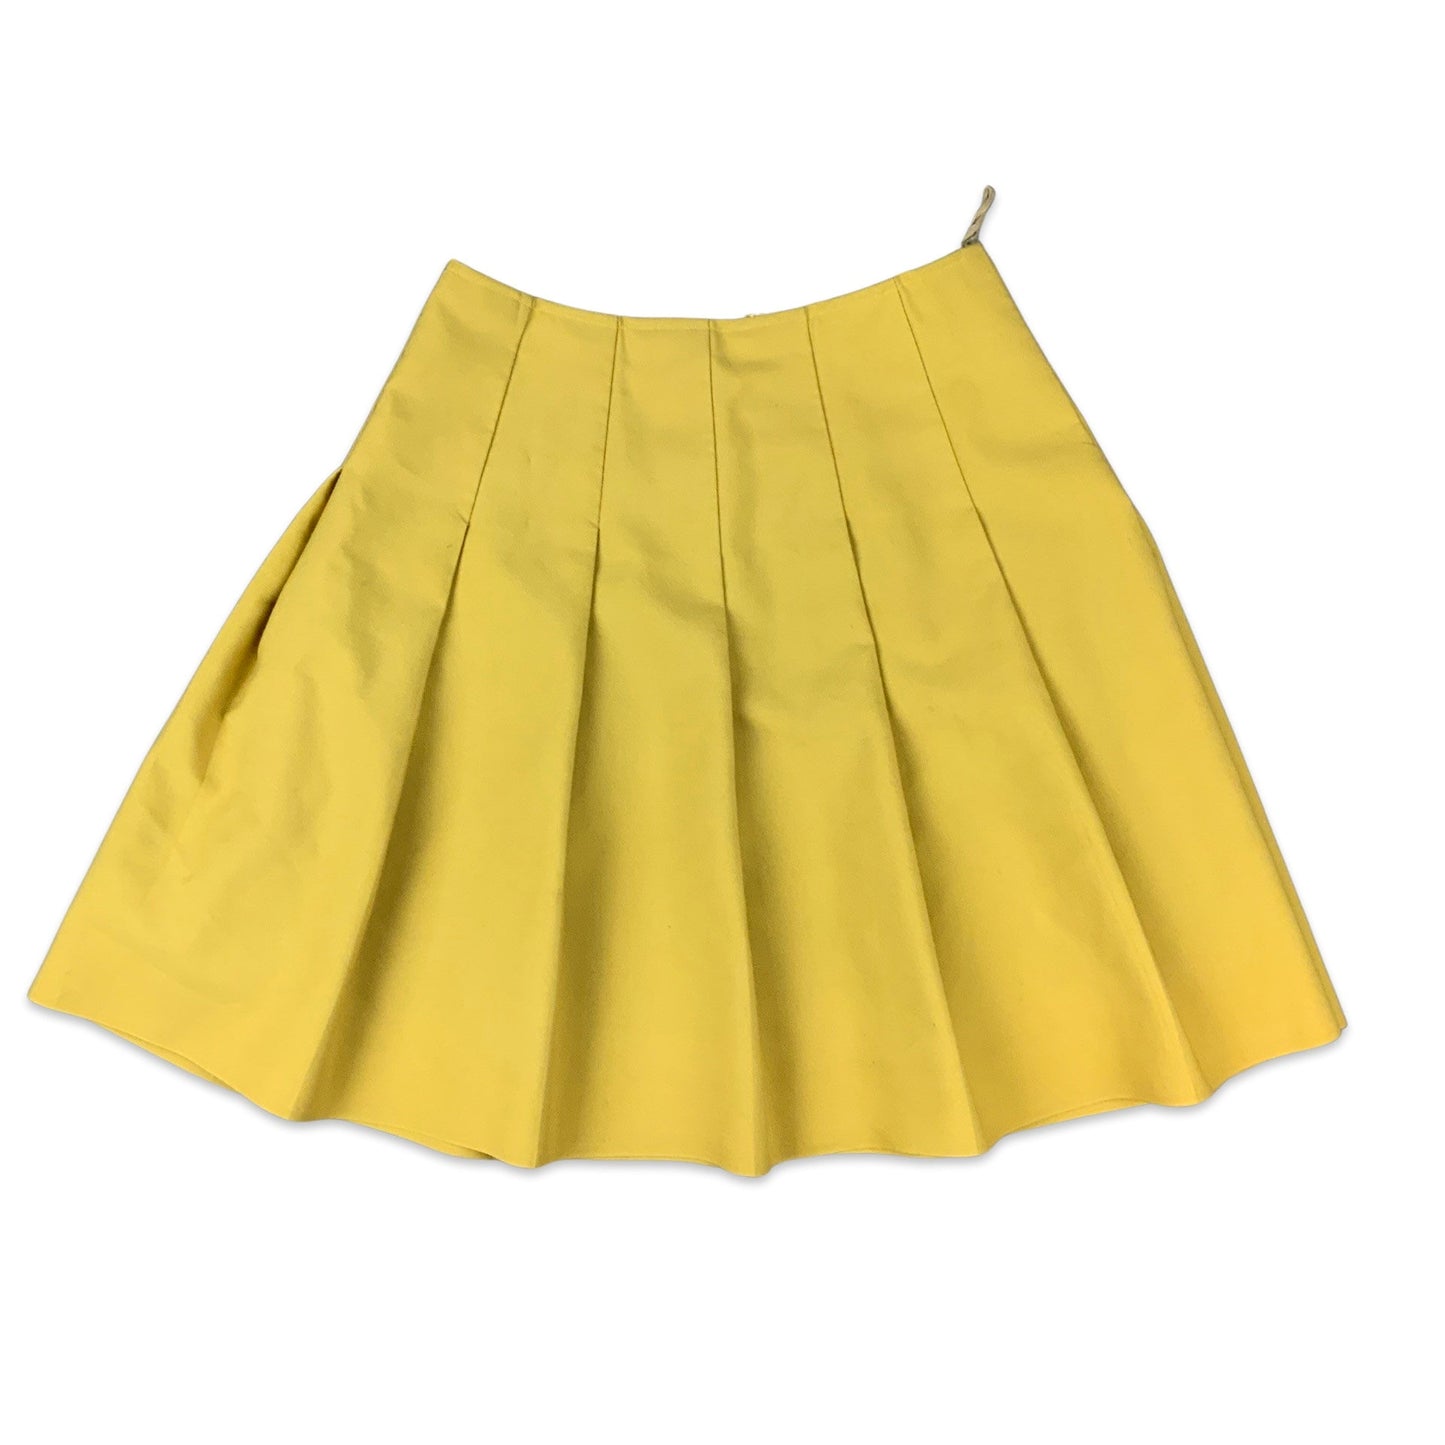 Vintage 60s Yellow Pleated Skirt 4 6